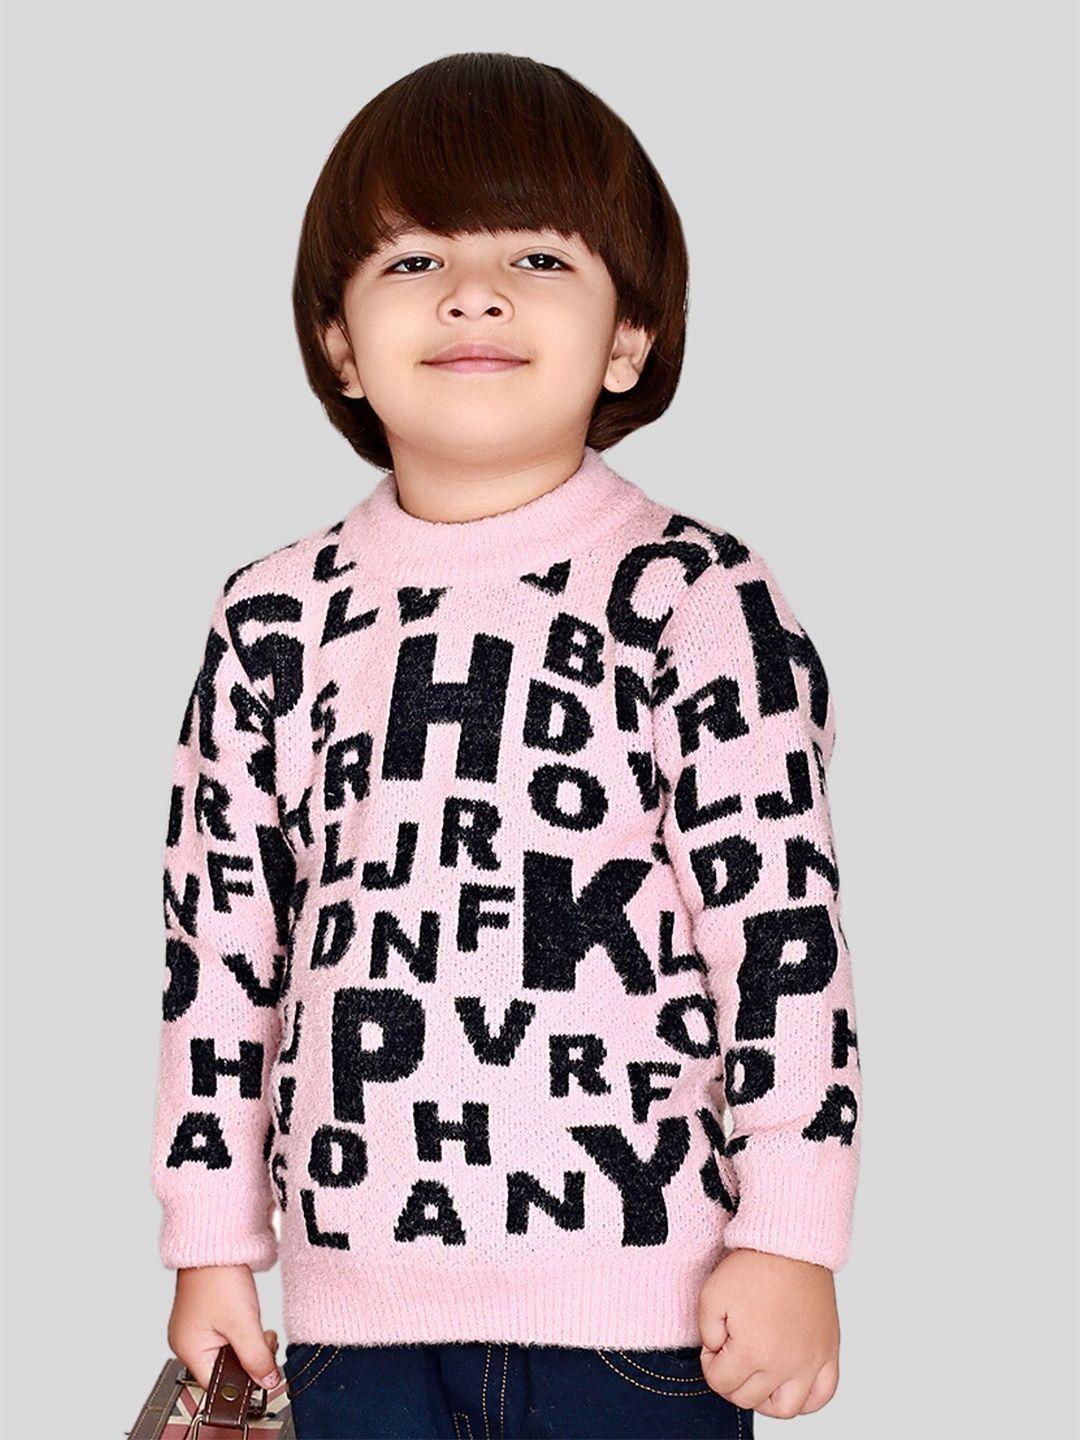 baesd kids typography printed round neck acrylic pullover sweater